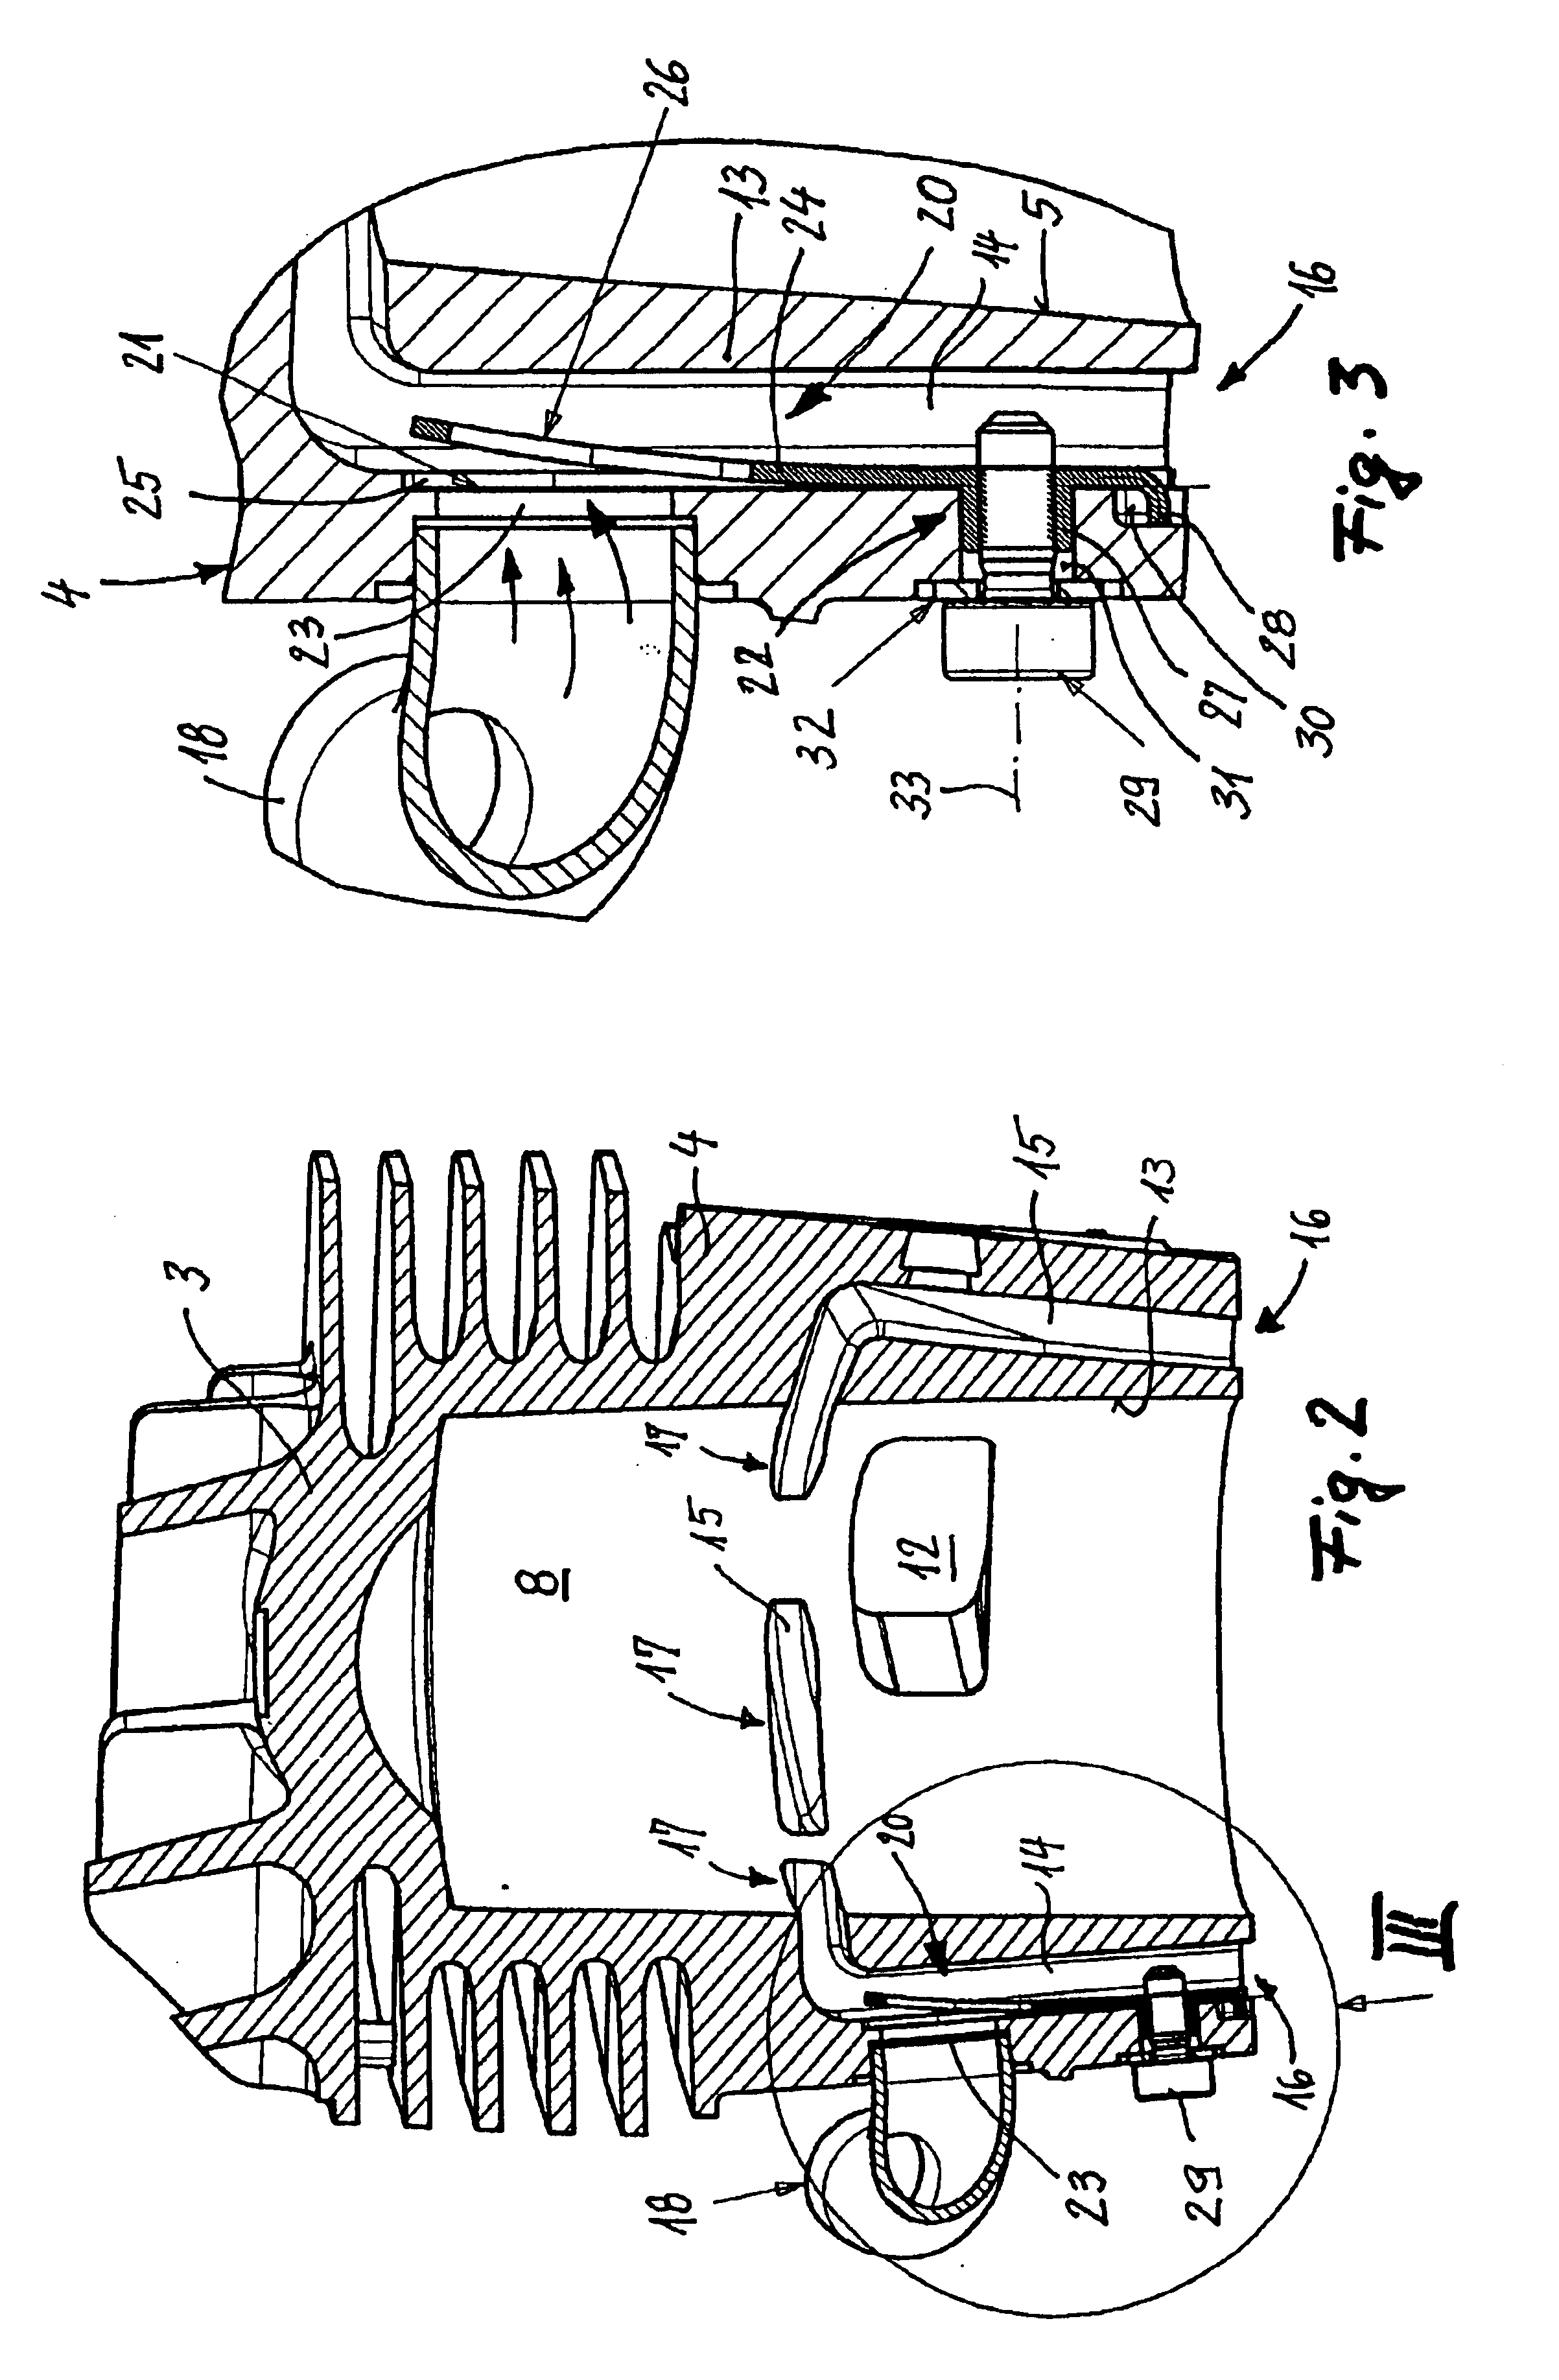 Two-stroke engine having a membrane valve integrated into the transfer channel